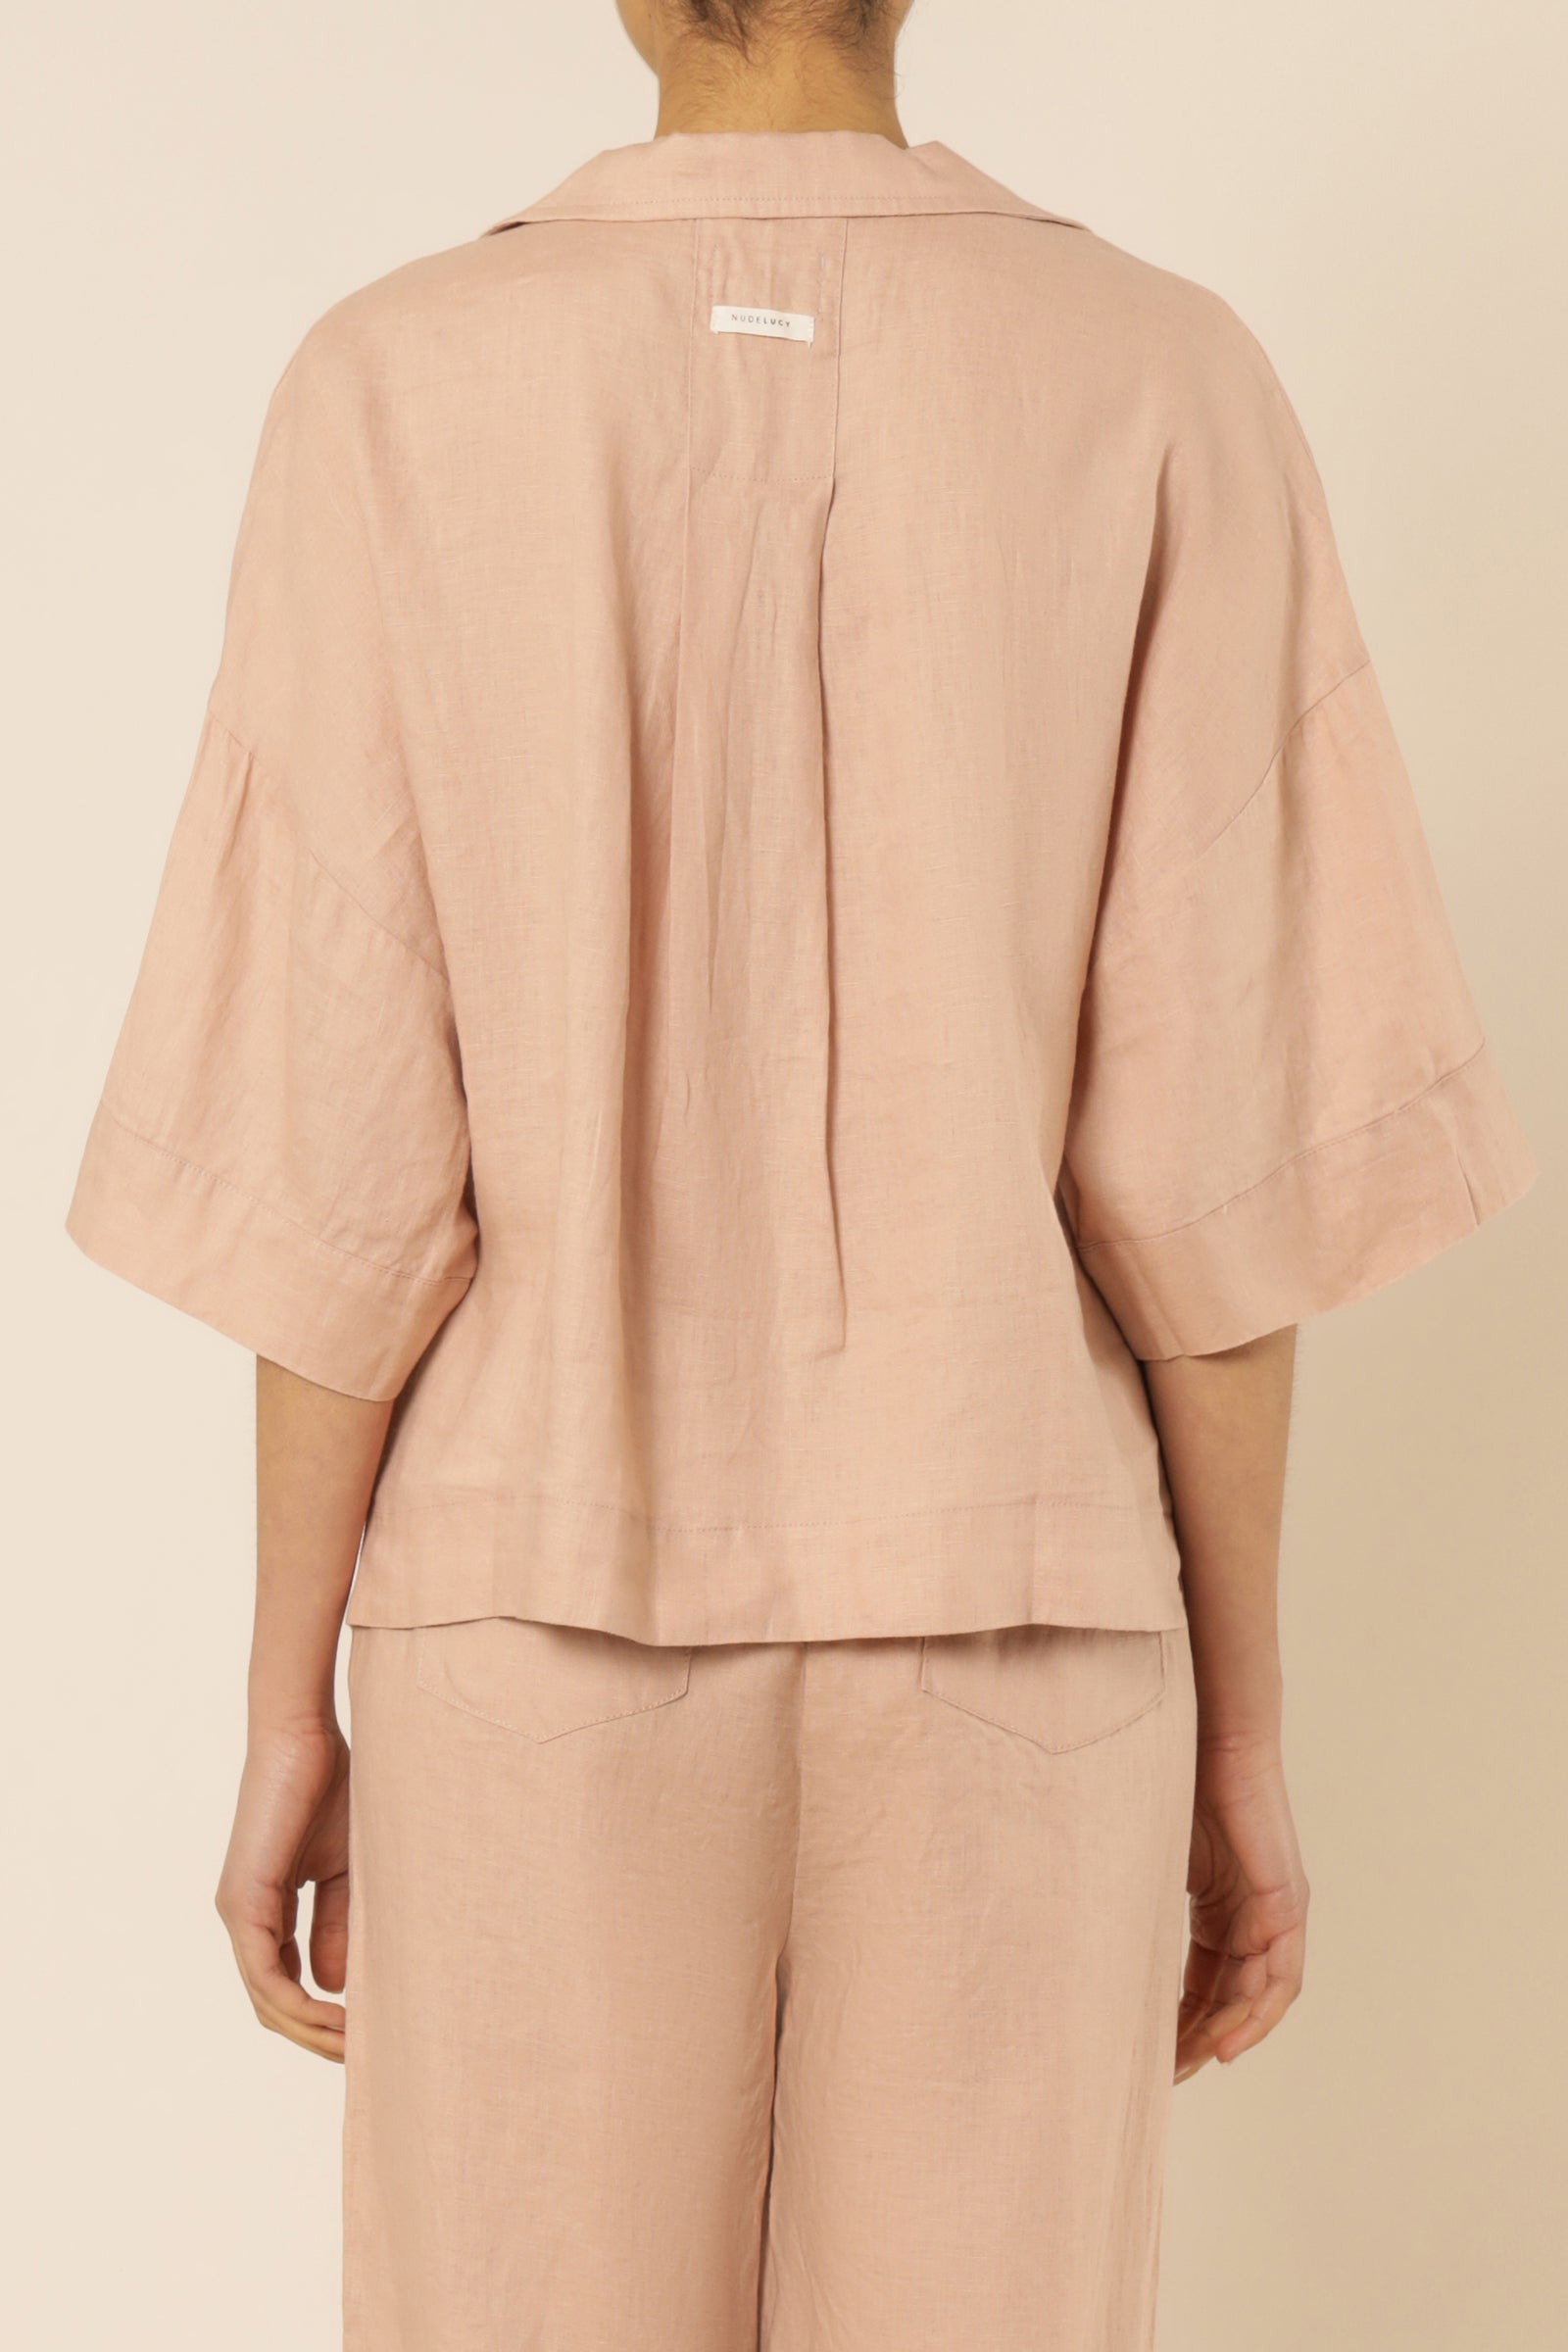 Nude Lucy Nude Lounge Linen Shirt Clay Shirt 